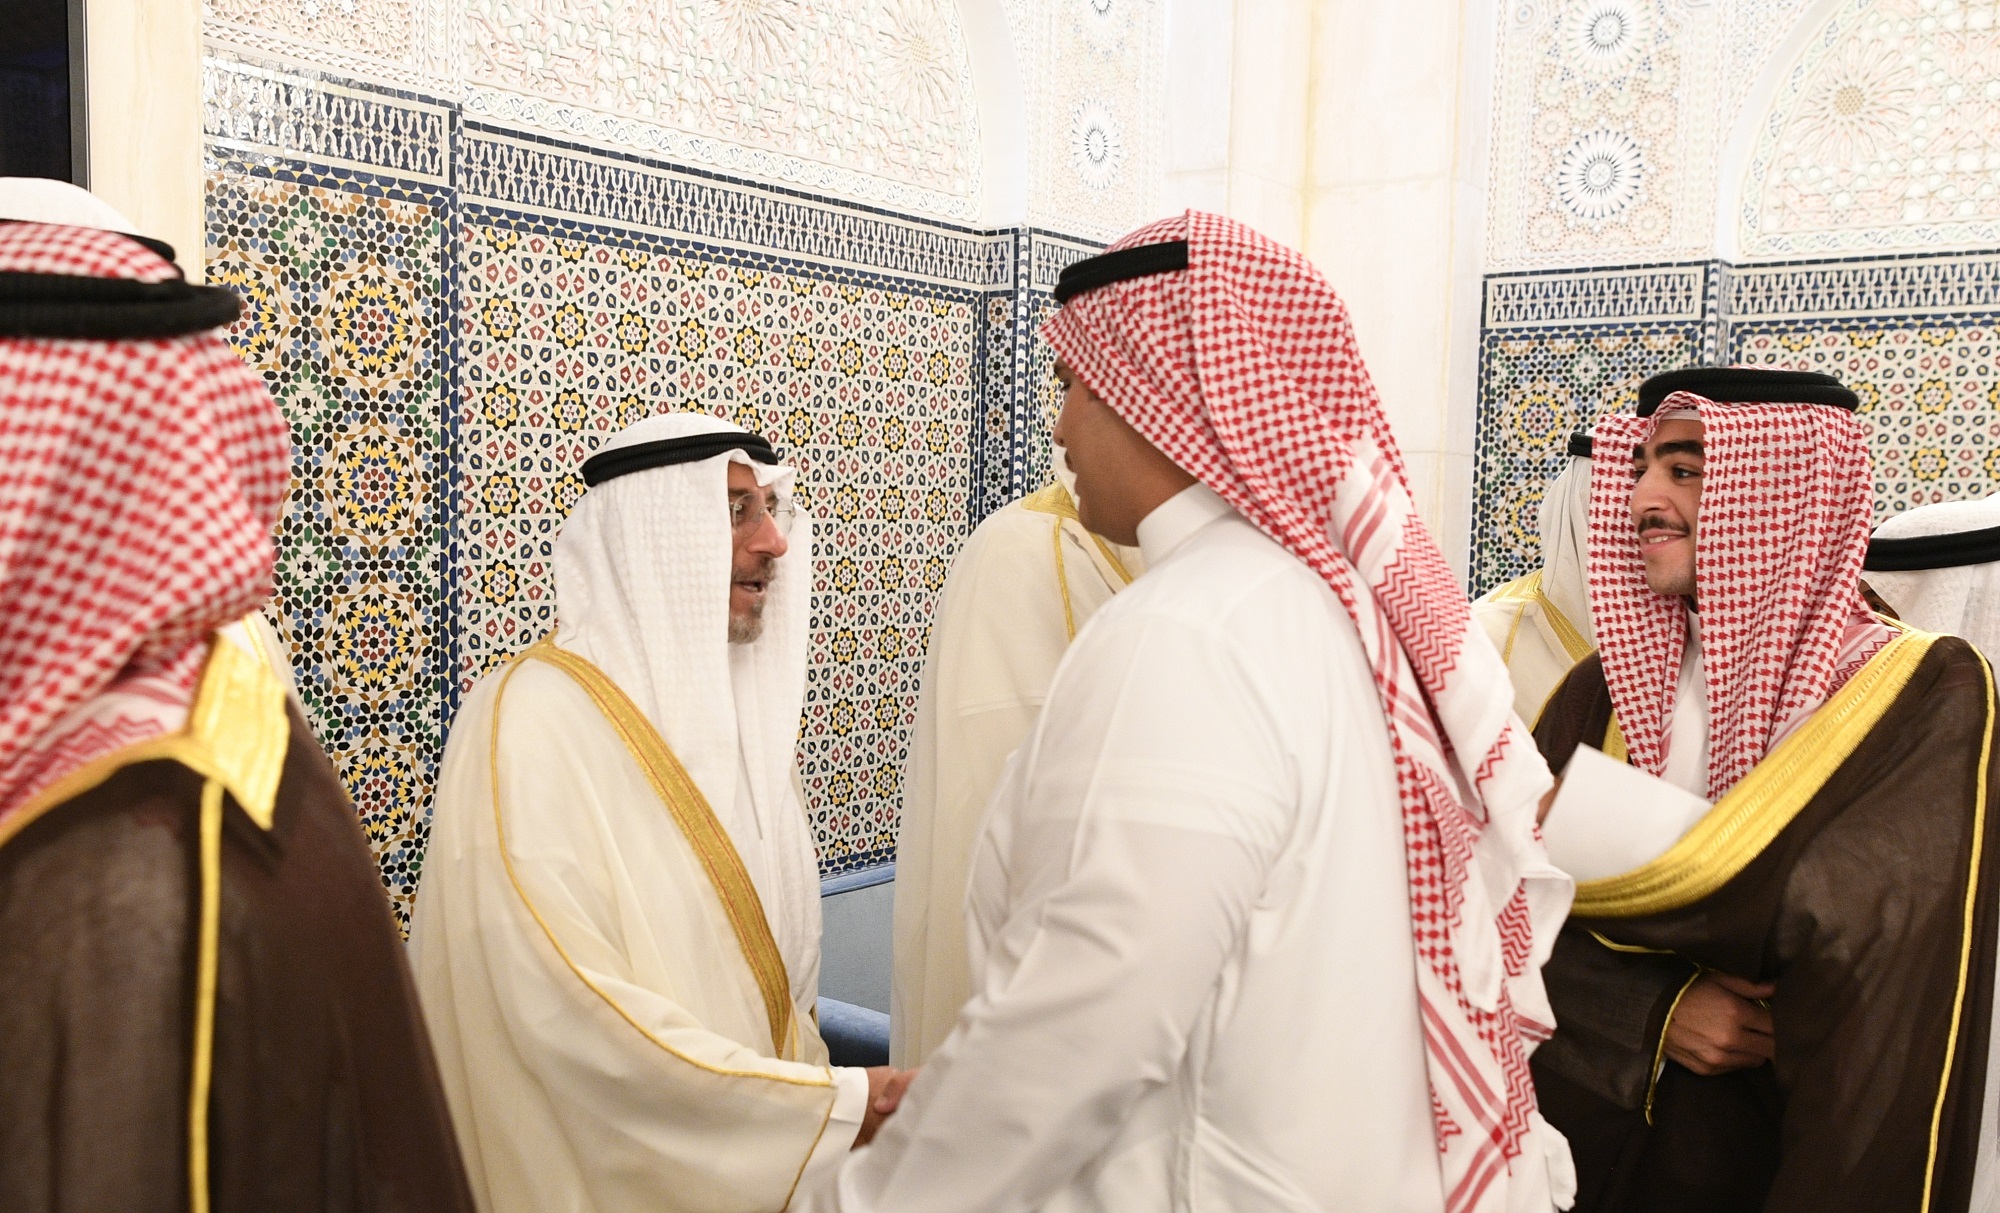 His Highness the Prime Minister Sheikh Dr. Mohammad Sabah Al-Salem Al-Sabah at the State Grand Mosque to perform Eid Al-Fitr prayer